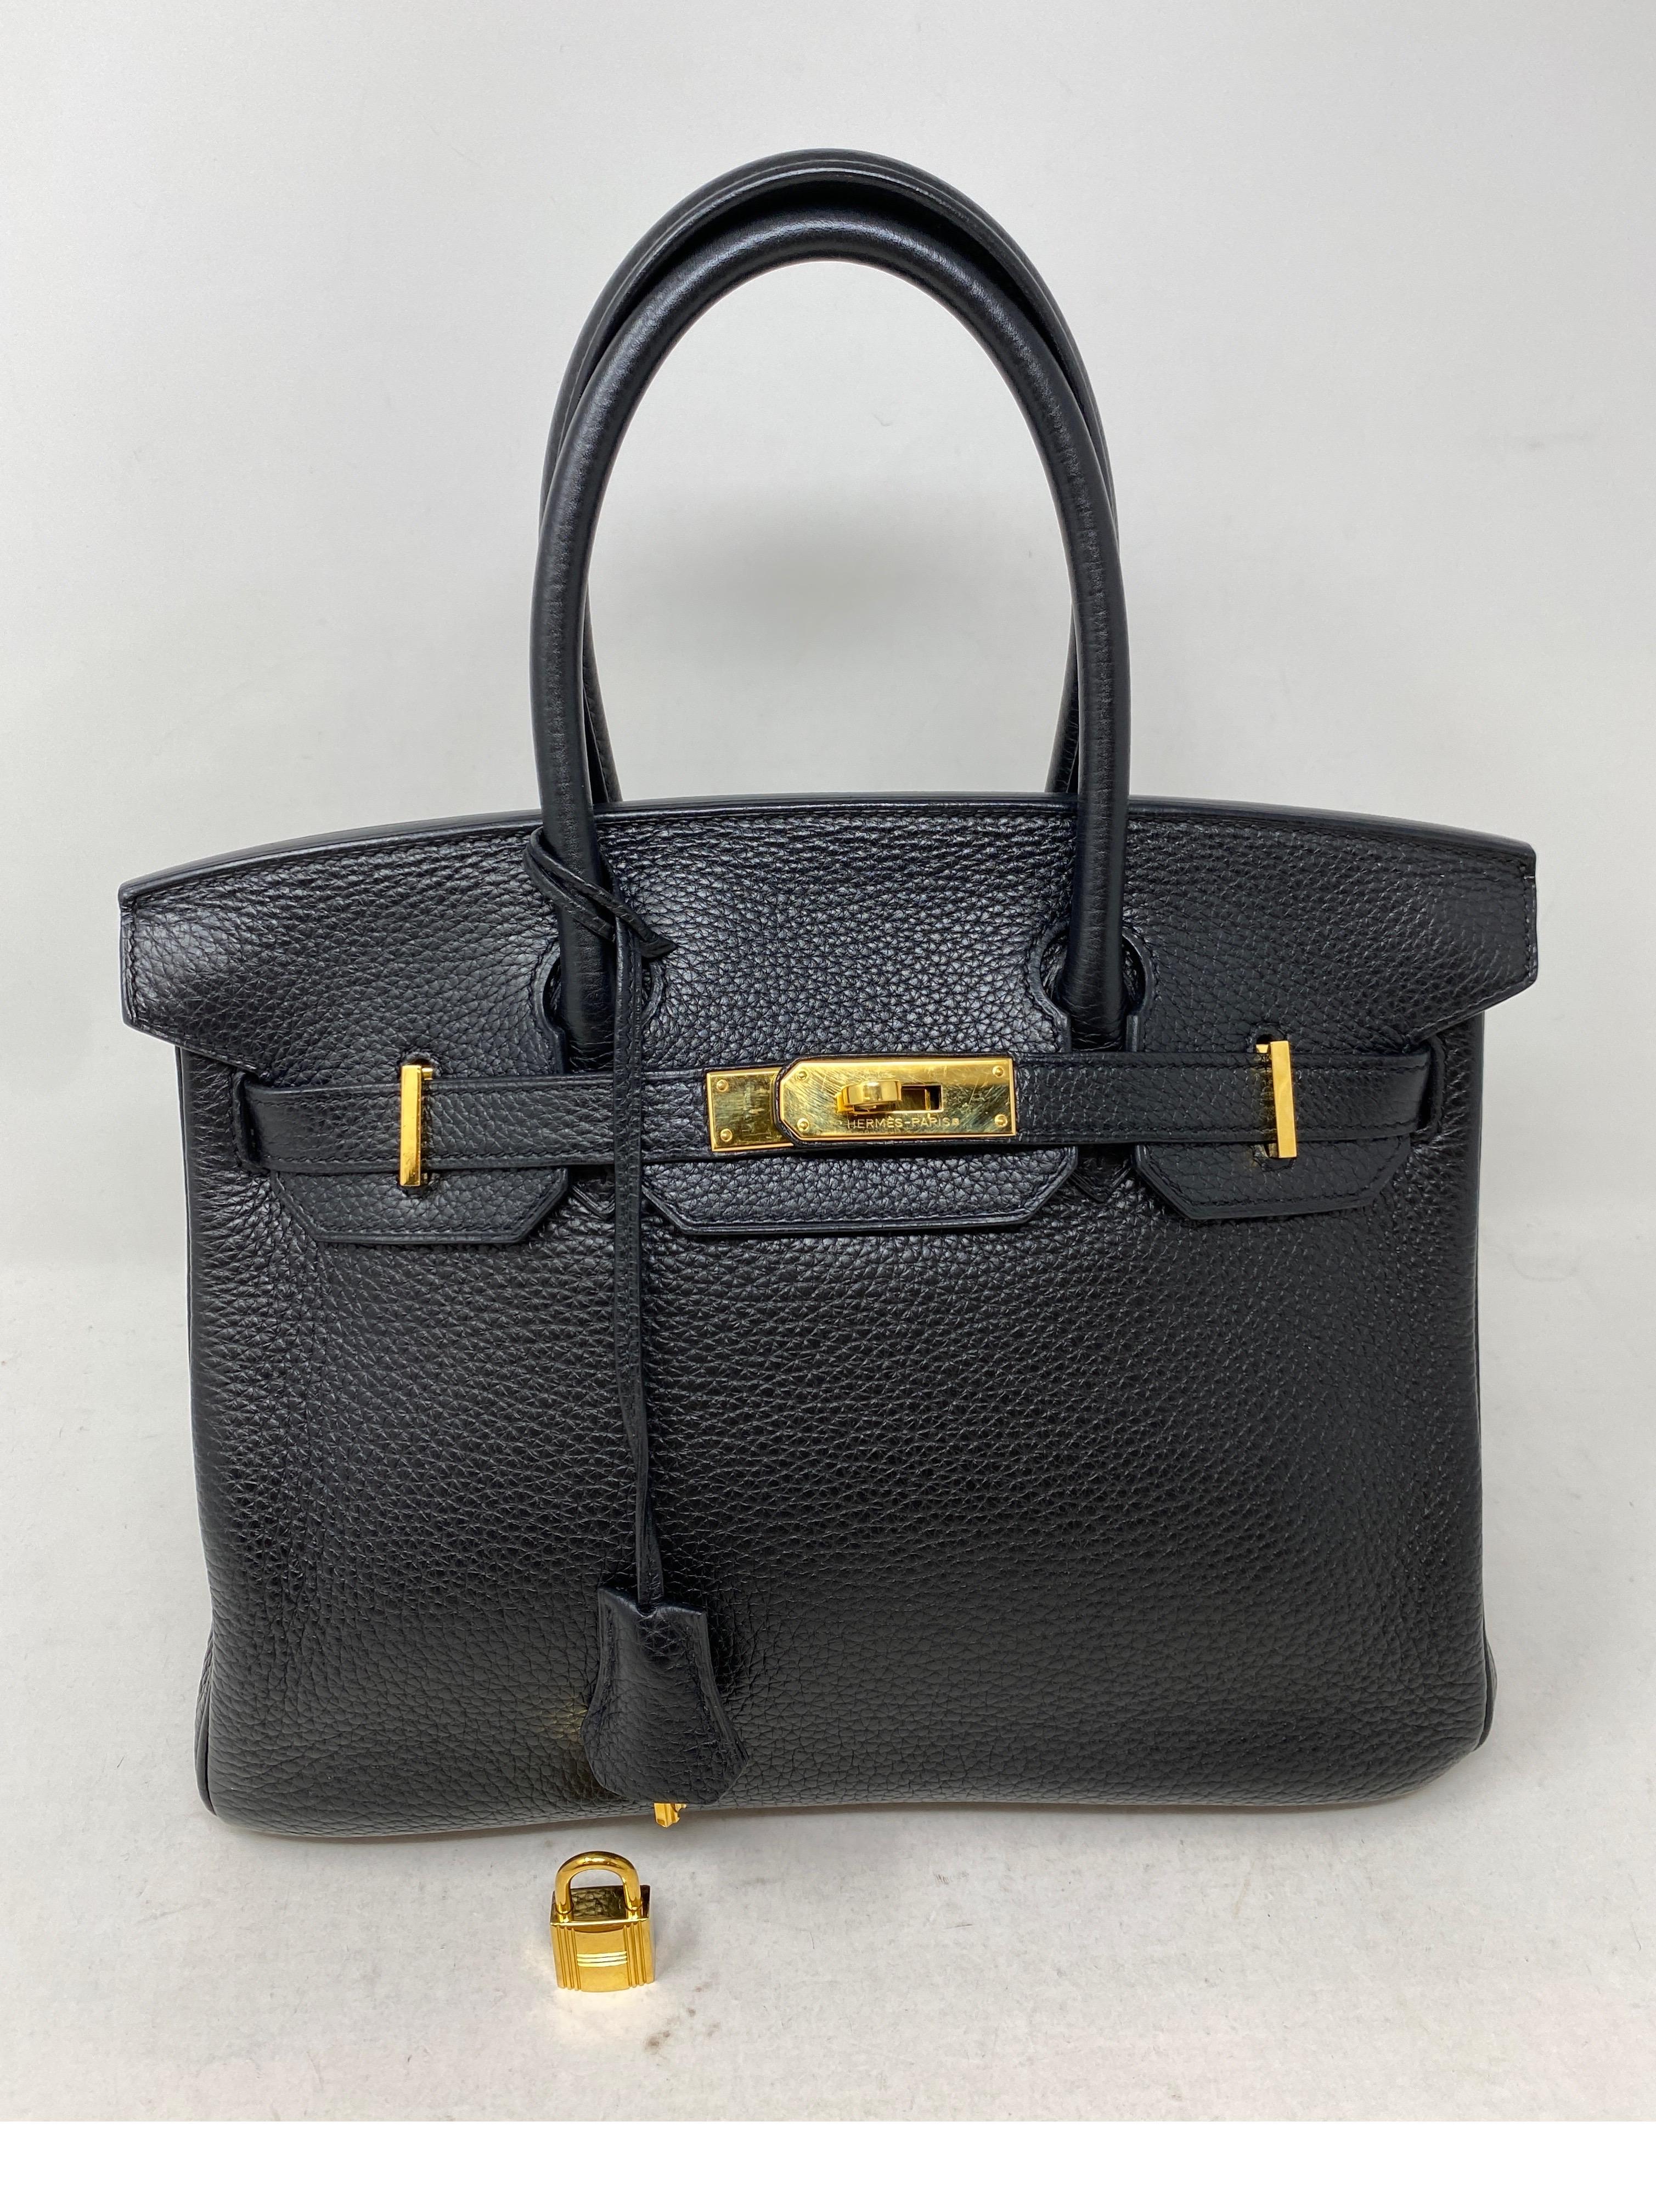 Hermes Black Birkin 30 Bag. Most wanted size and color combination. Classic black with gold hardware. Good condition. Clemence leather. Includes clochette, lock, keys, and dust cover. Guaranteed authentic. 